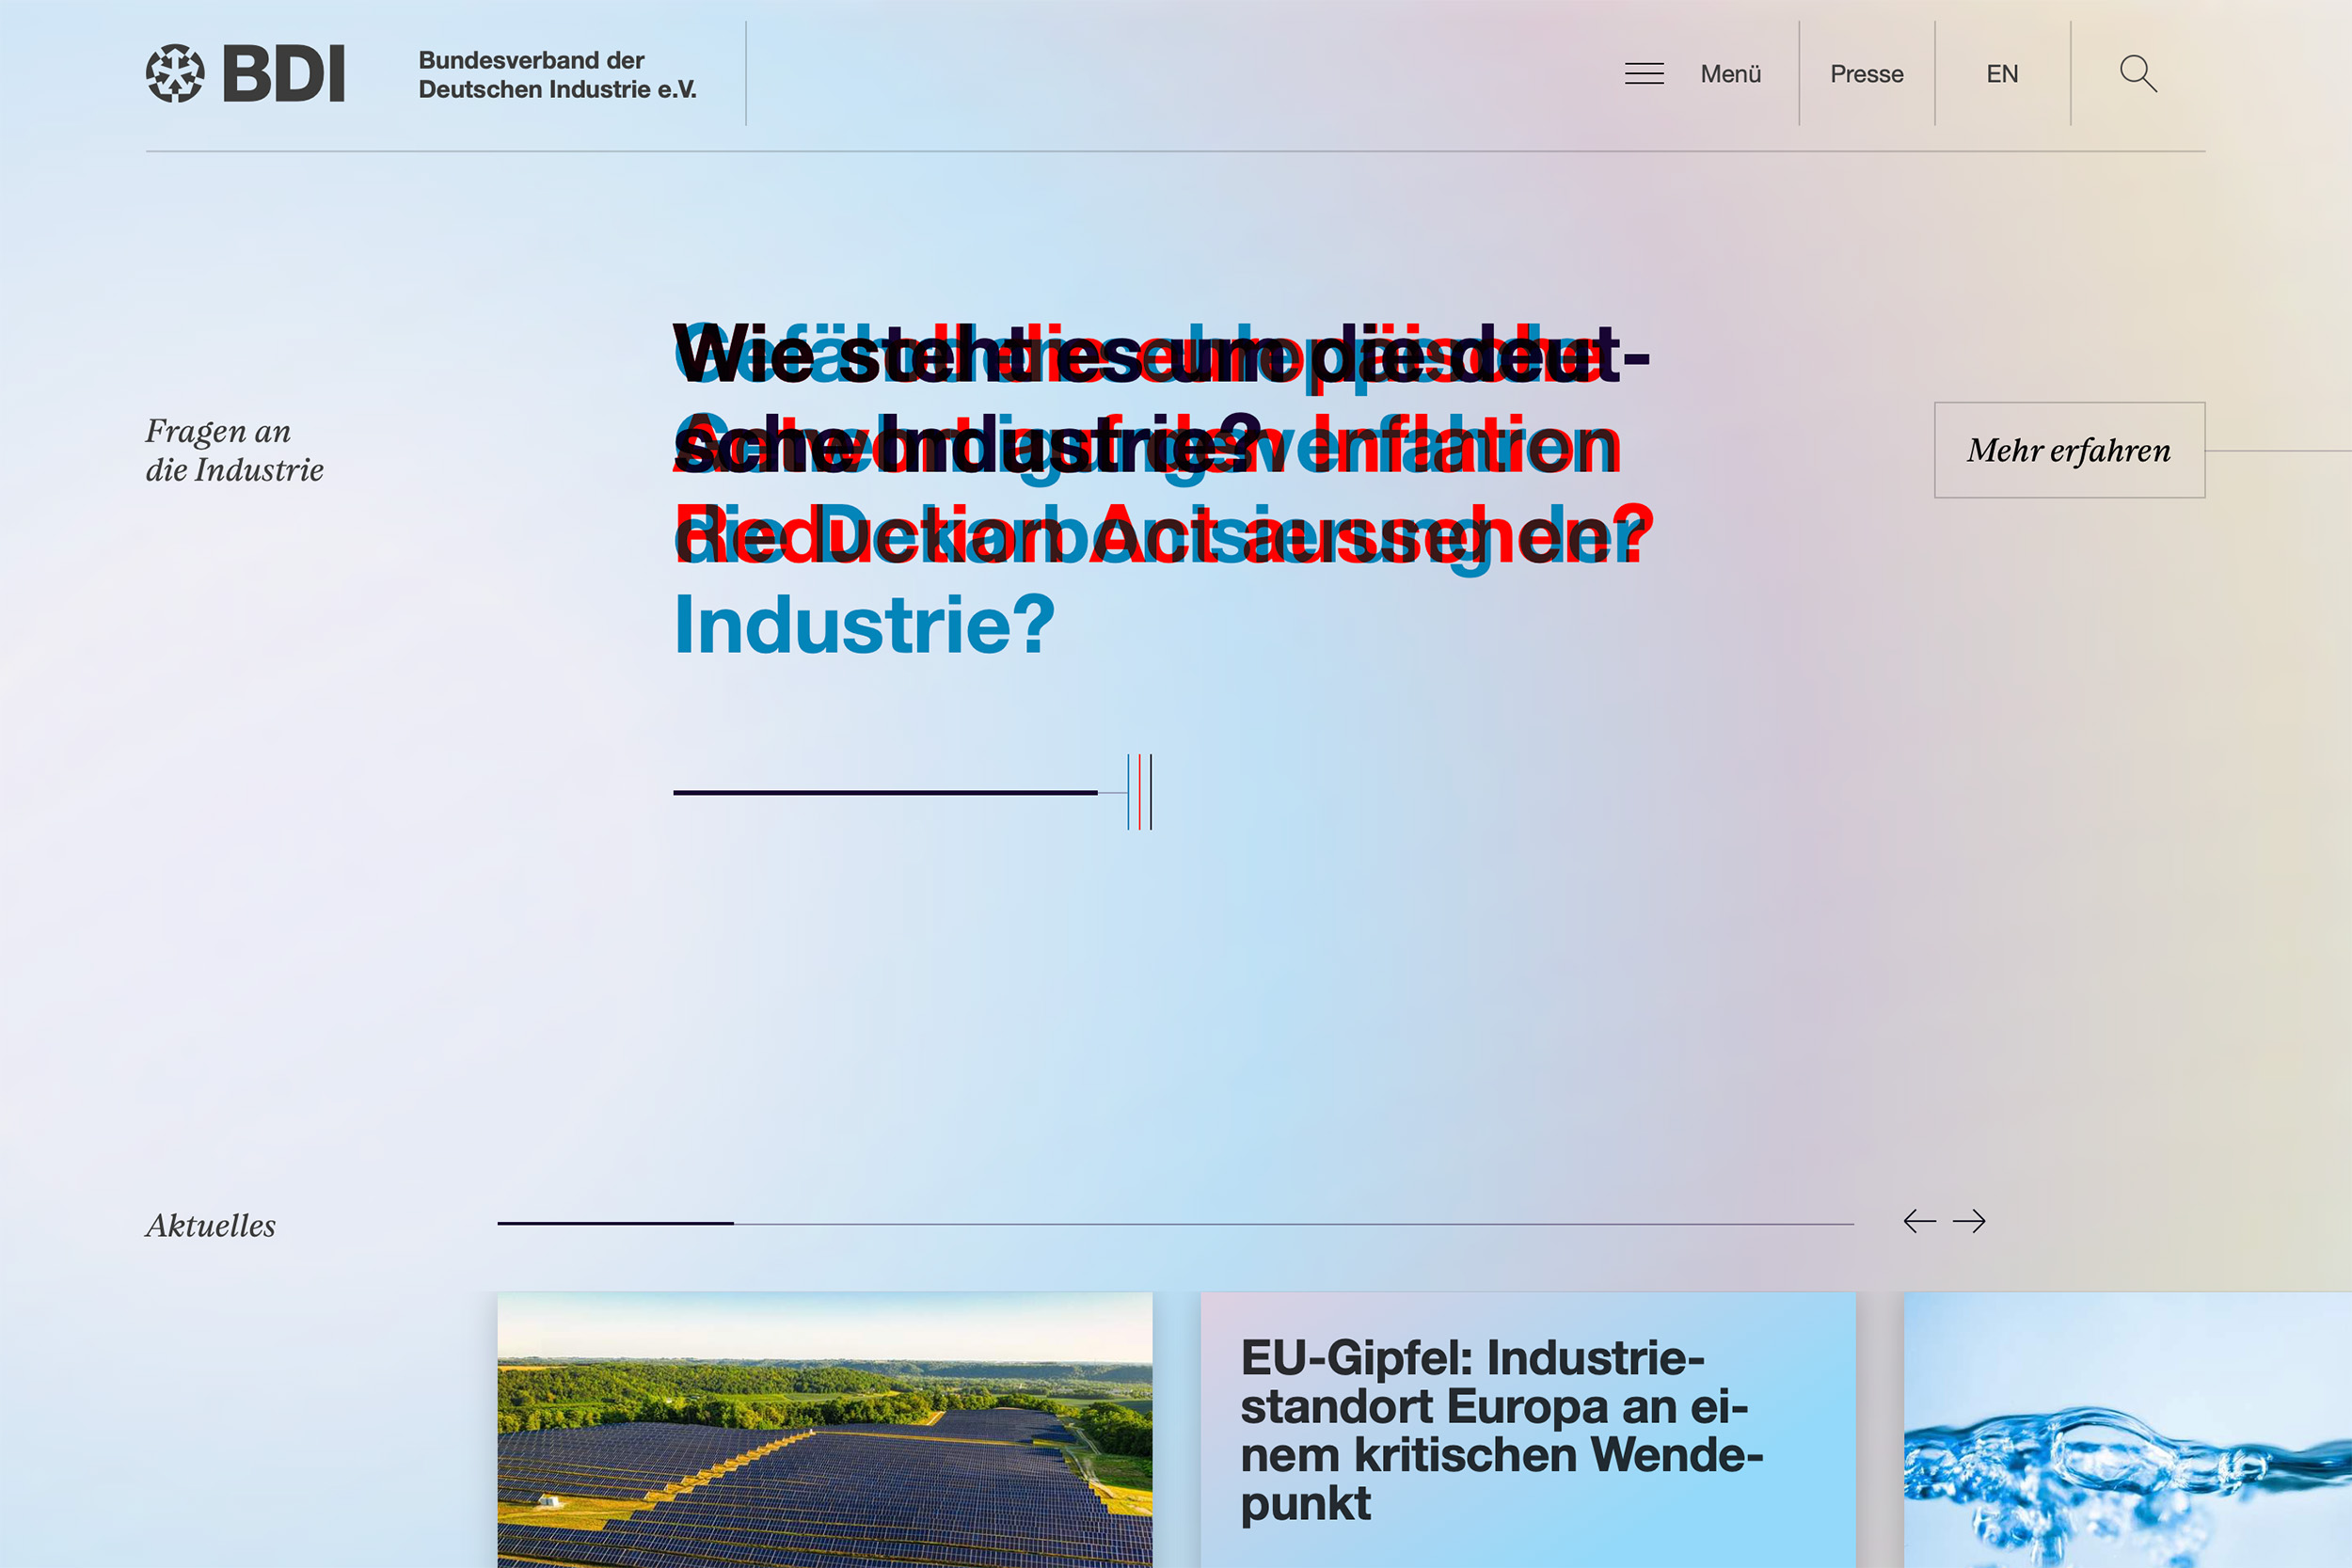 A clean and reduced start page with a lot of free space for the federal association of german industry. The focus point are different questions that are overlaying each other in different colors so they become hardly readable. The background is a gradient of light tones of blue, violet and orange.